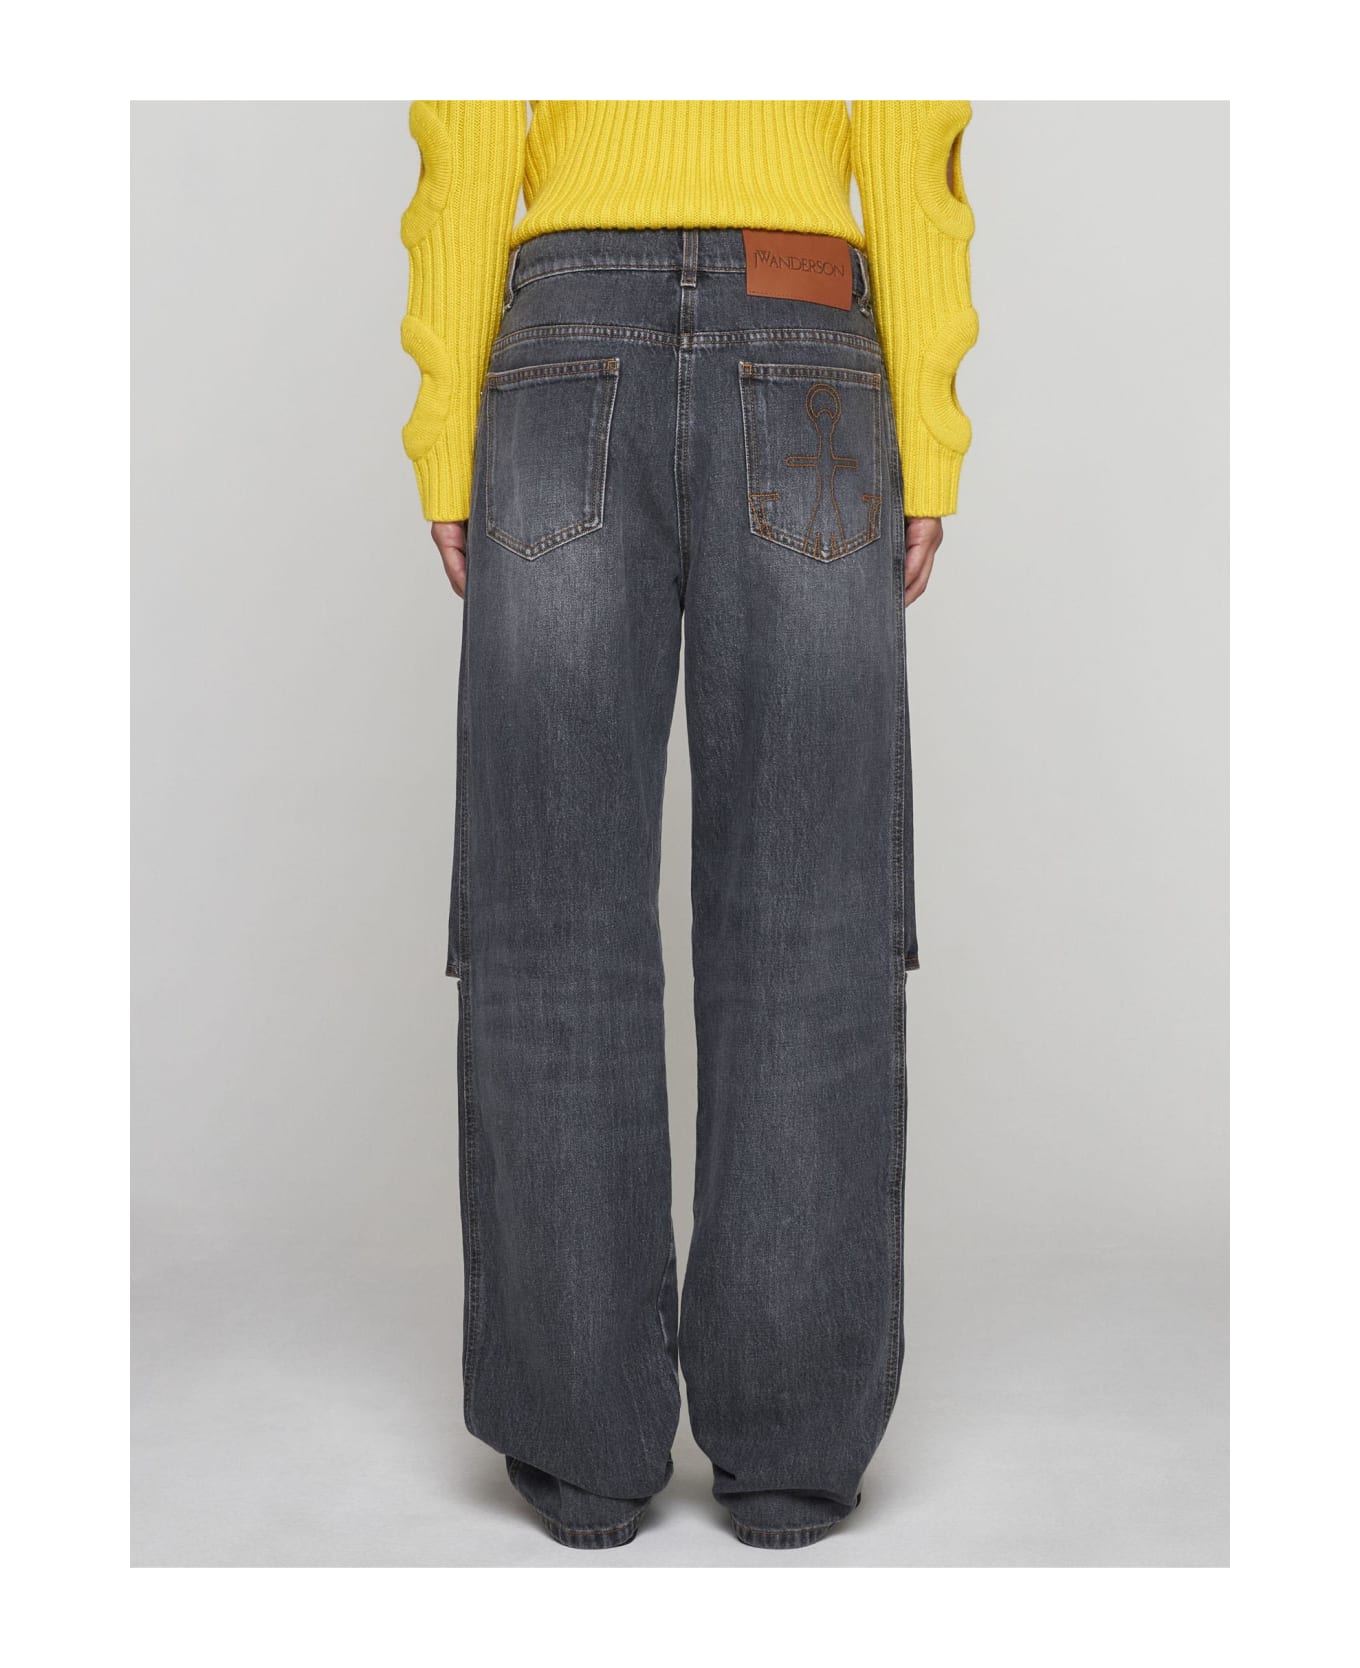 J.W. Anderson Cut-outs Knee Jeans - Grey デニム